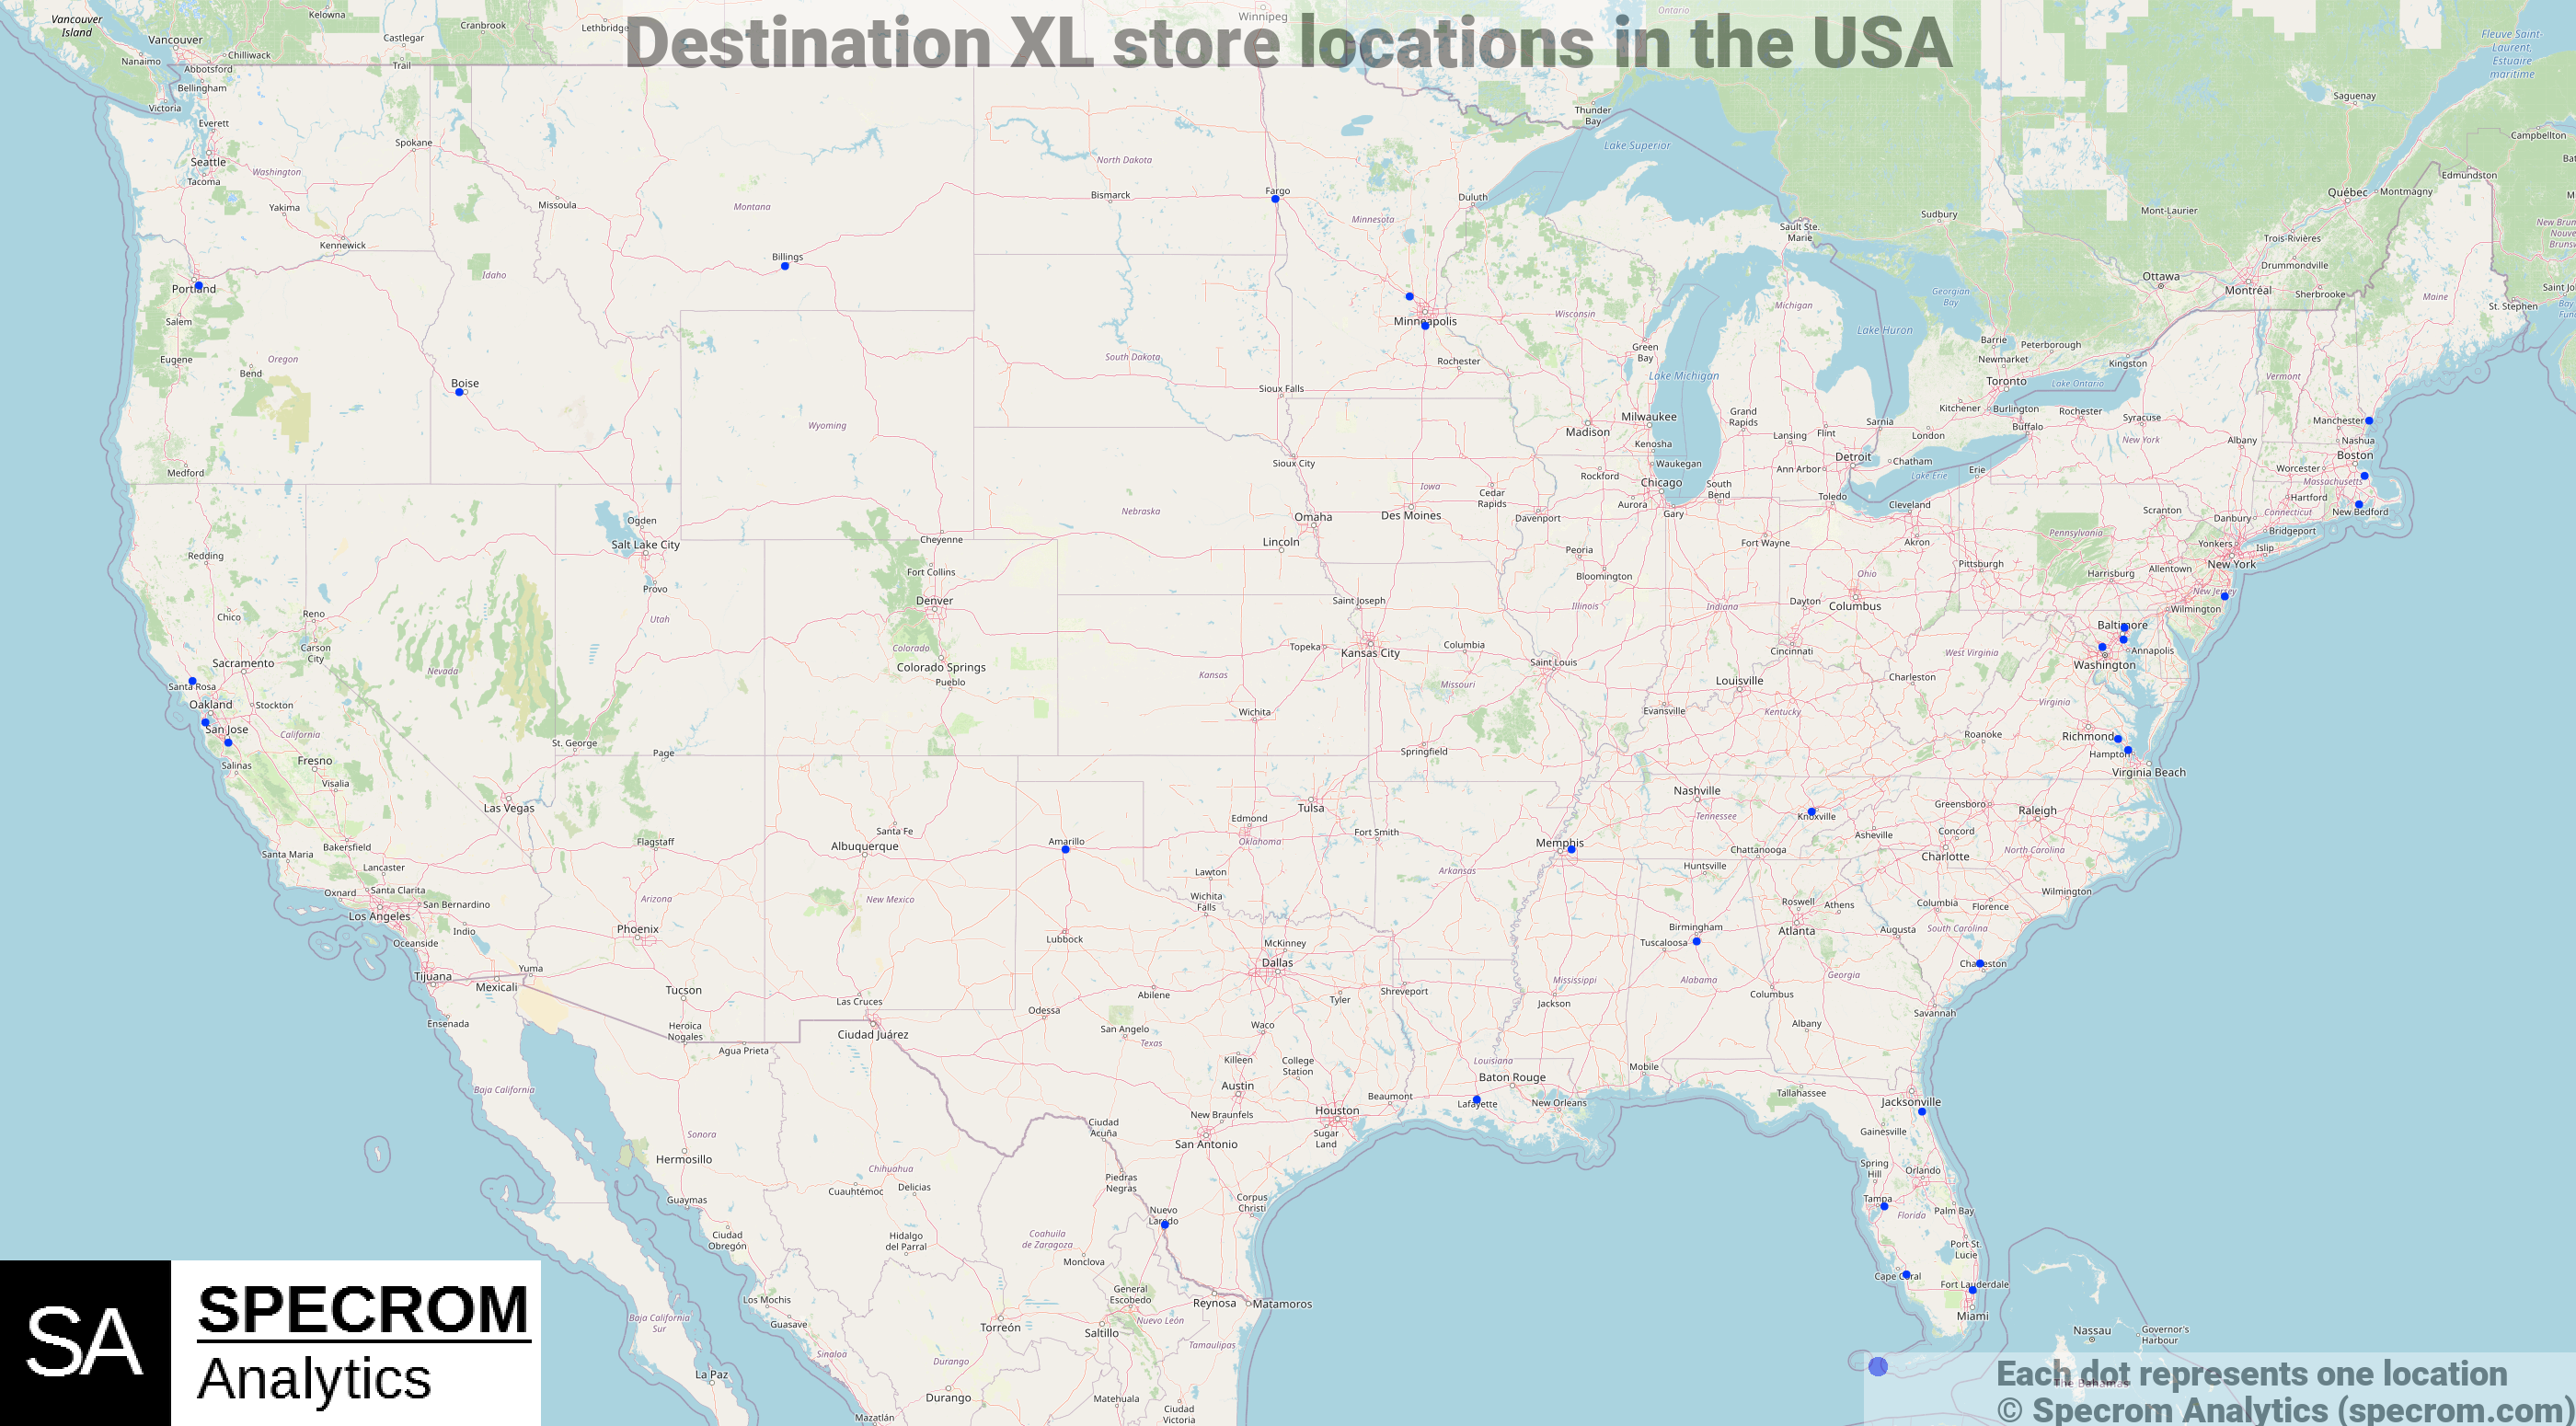 Destination XL store locations in the USA